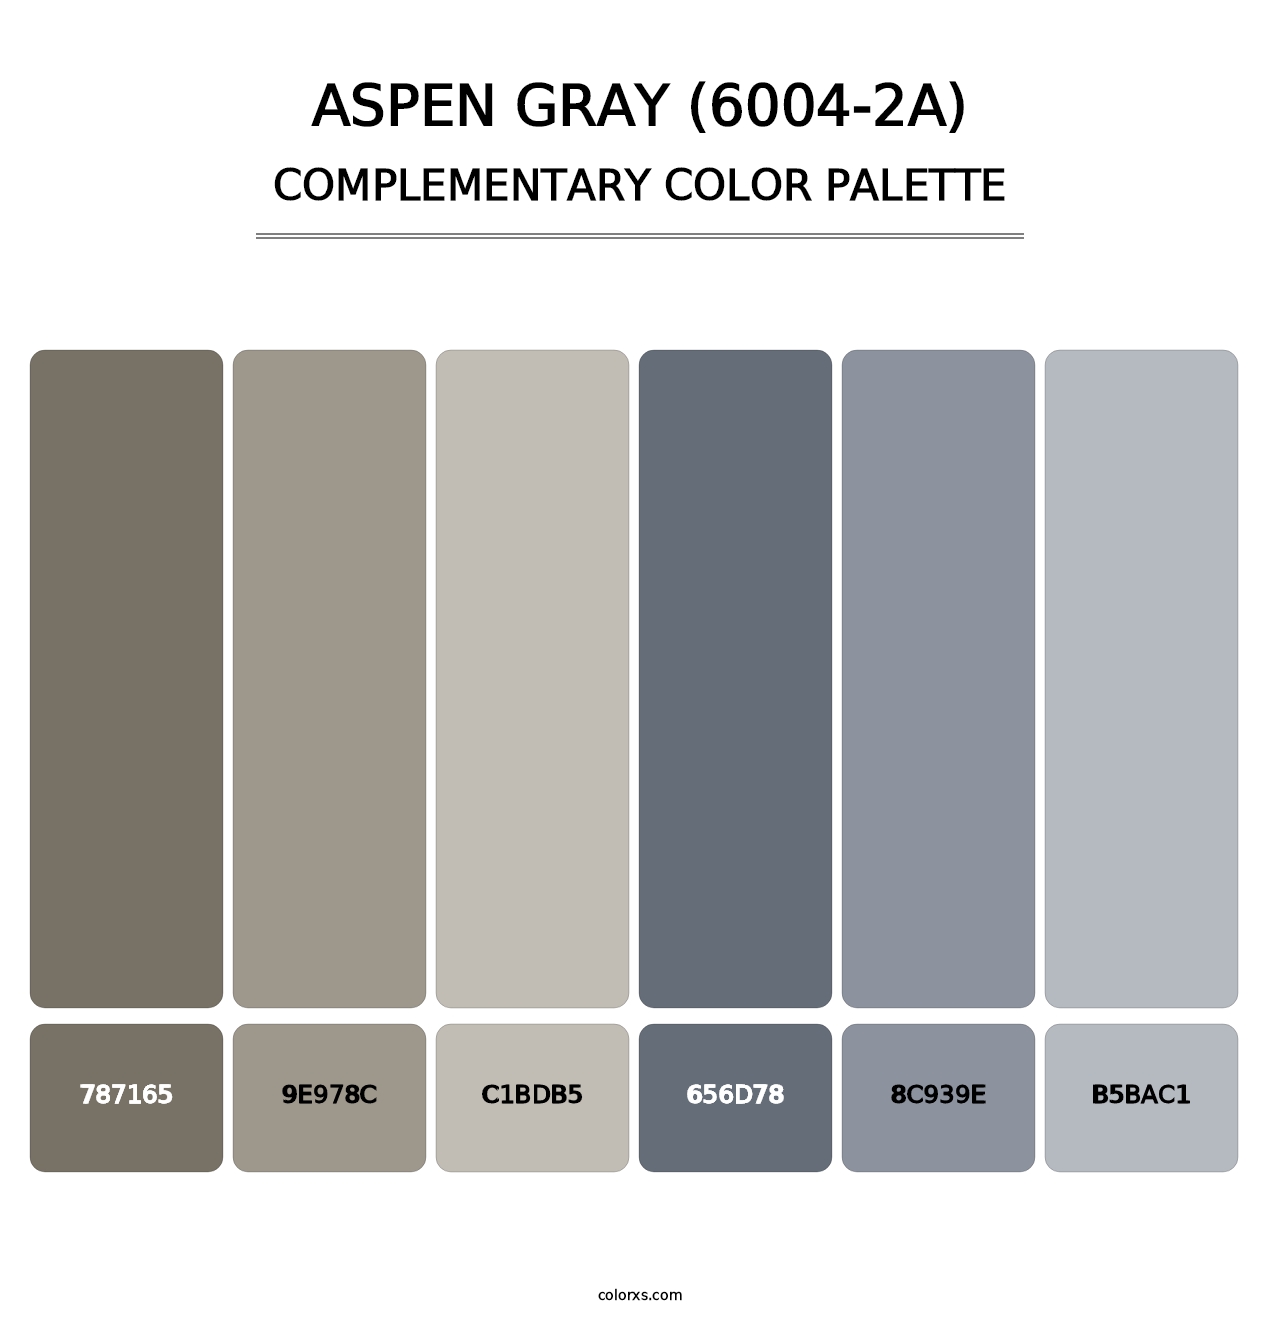 Aspen Gray (6004-2A) - Complementary Color Palette